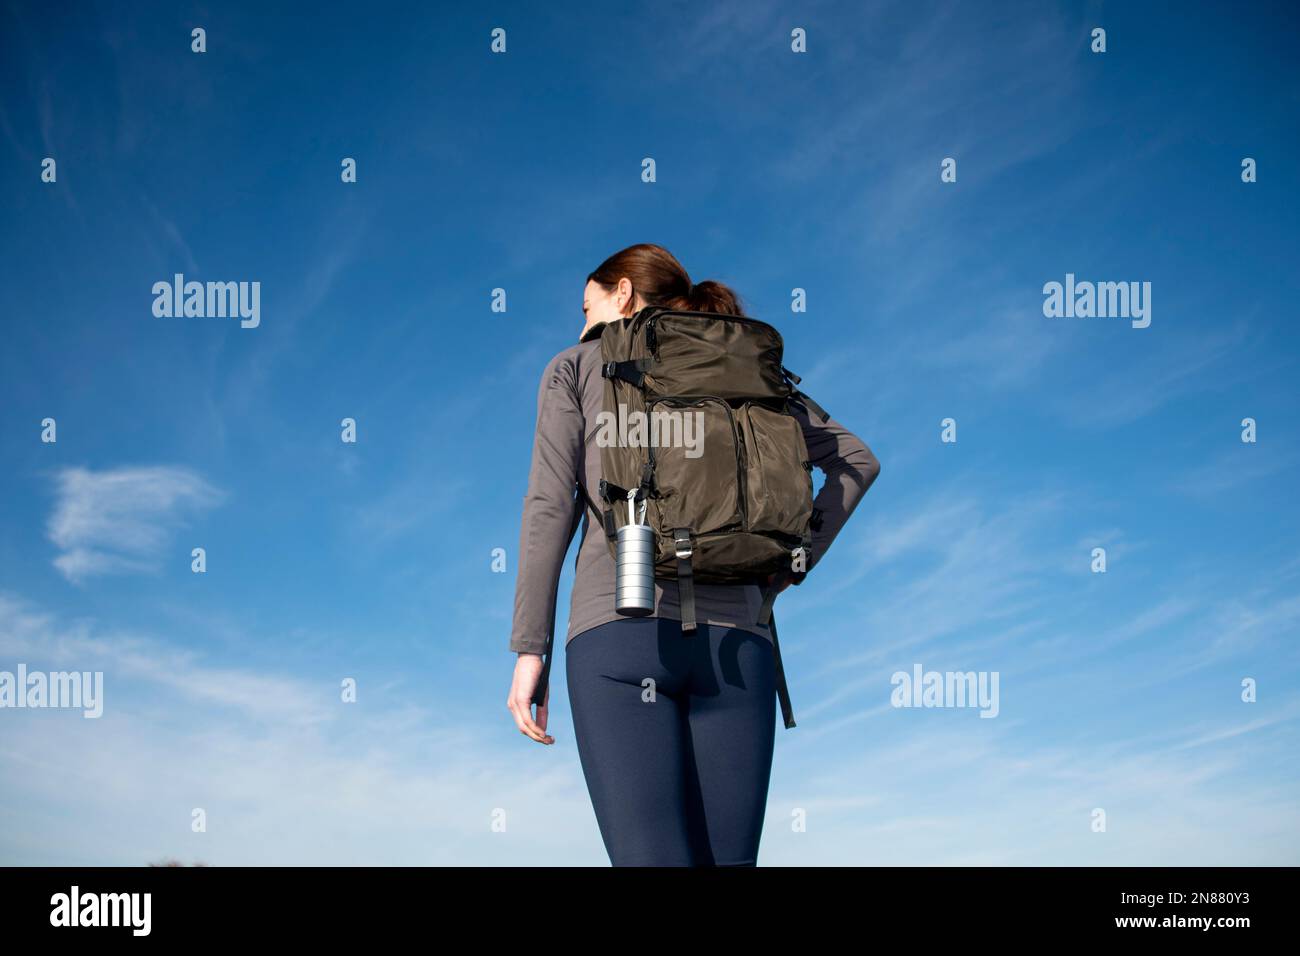 Rear view of a woman backpacker against a blue sky. Stock Photo